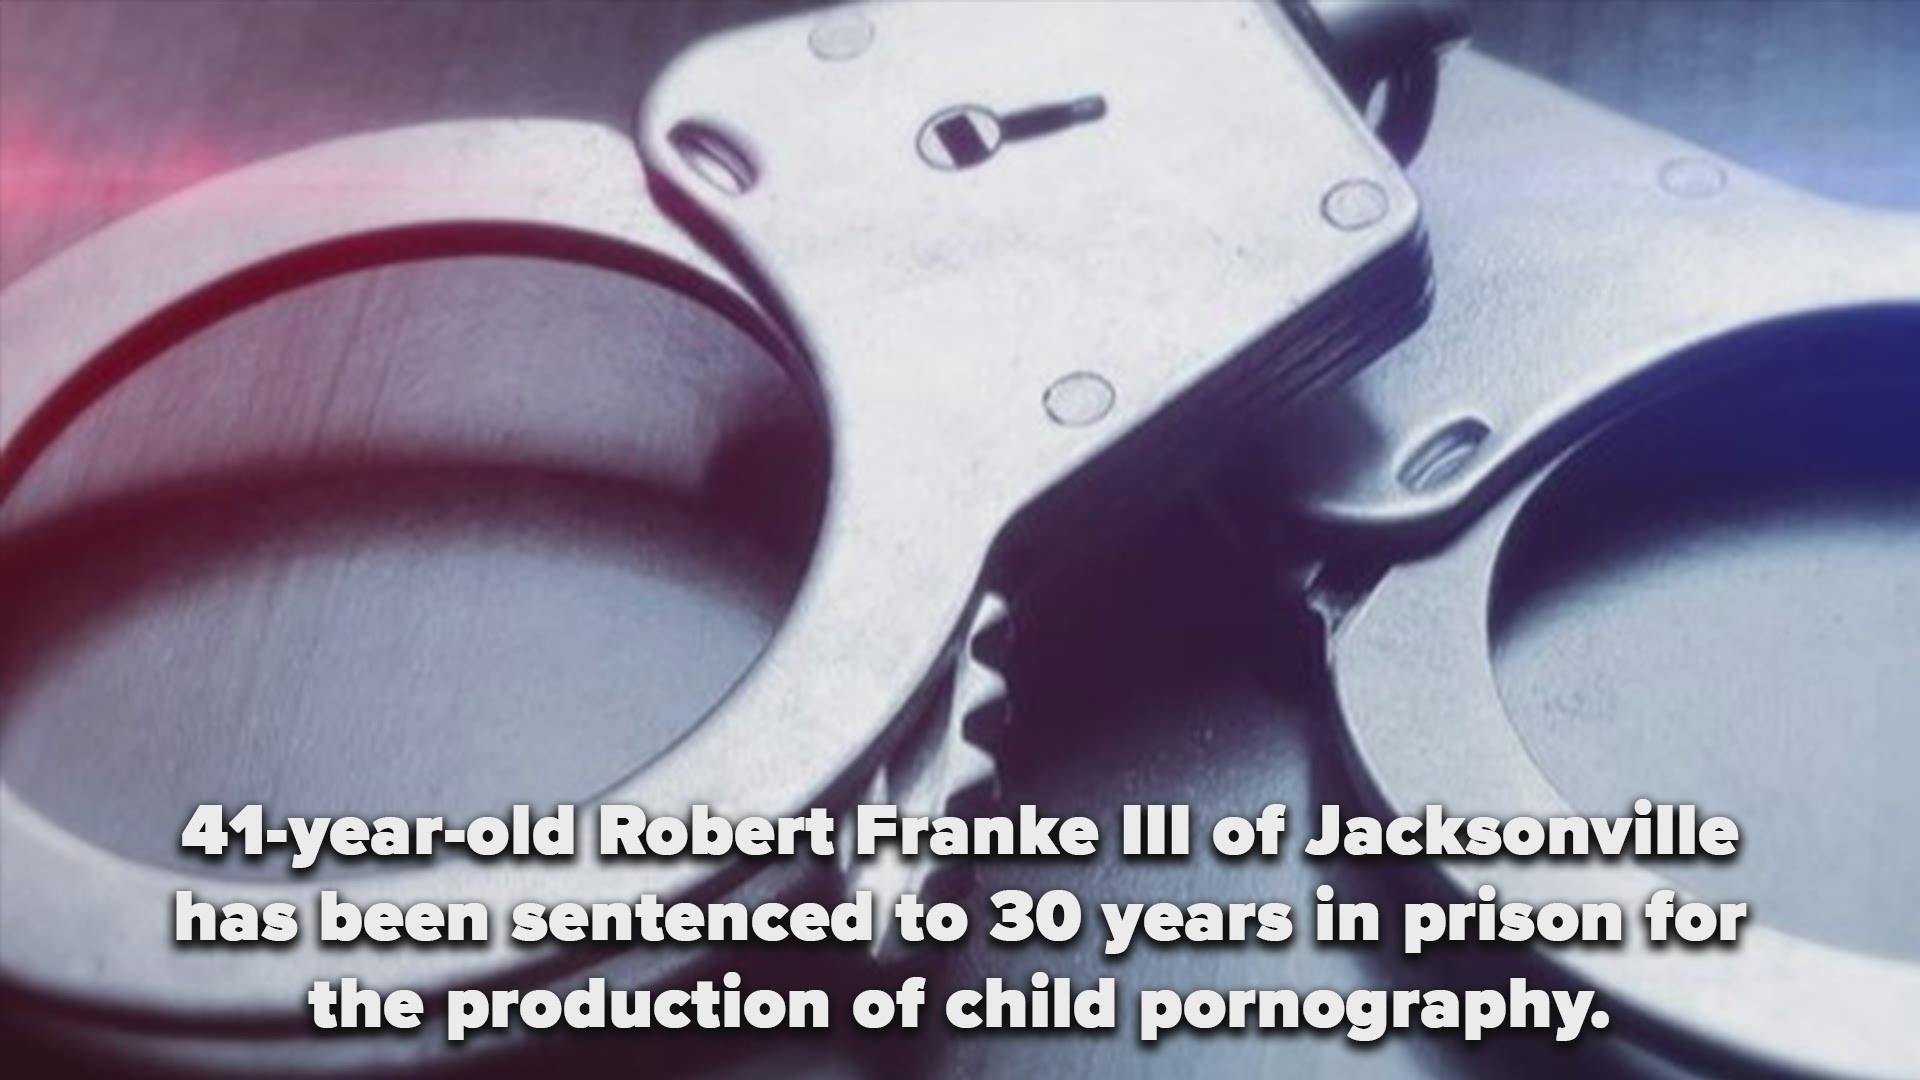 41-year-old Robert Franke III of Jacksonville has been sentenced to 30 years in prison for the production of child pornography.